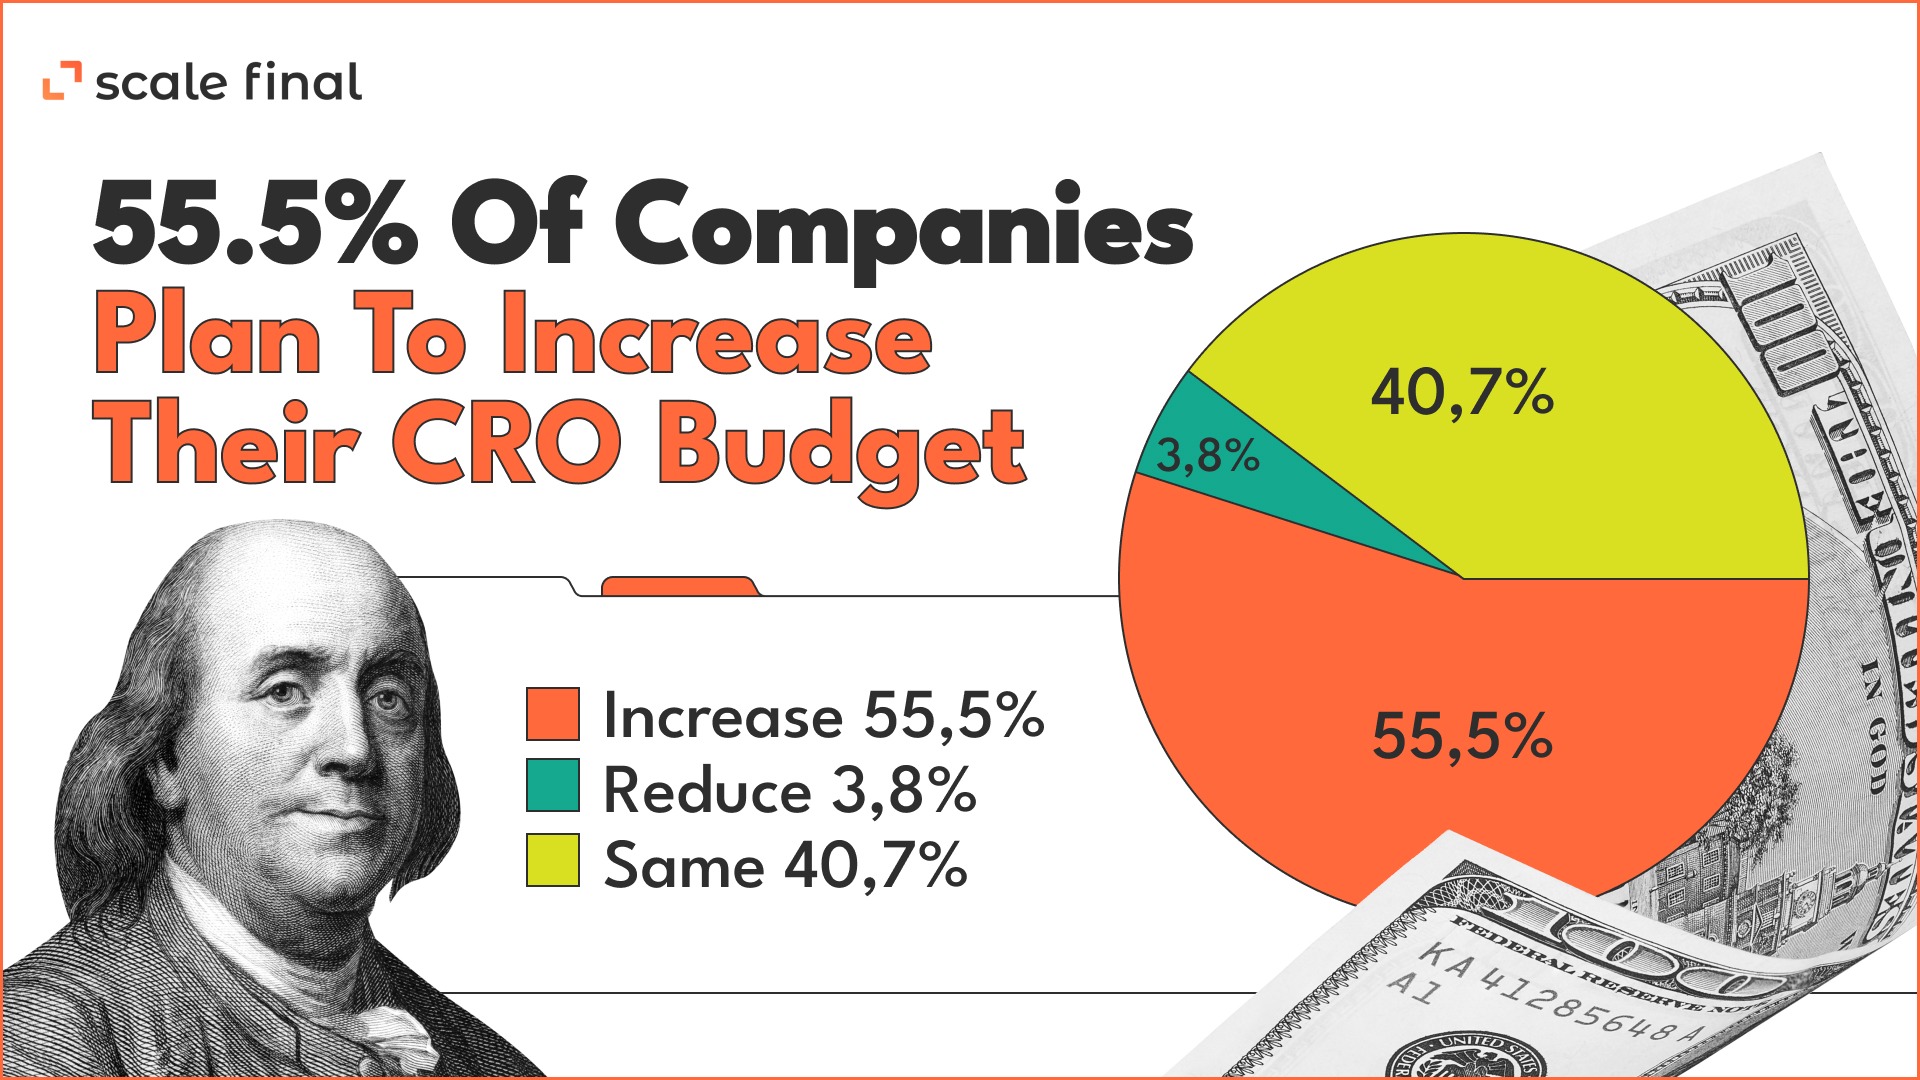 55.5% of companies plan to increase cro budget 